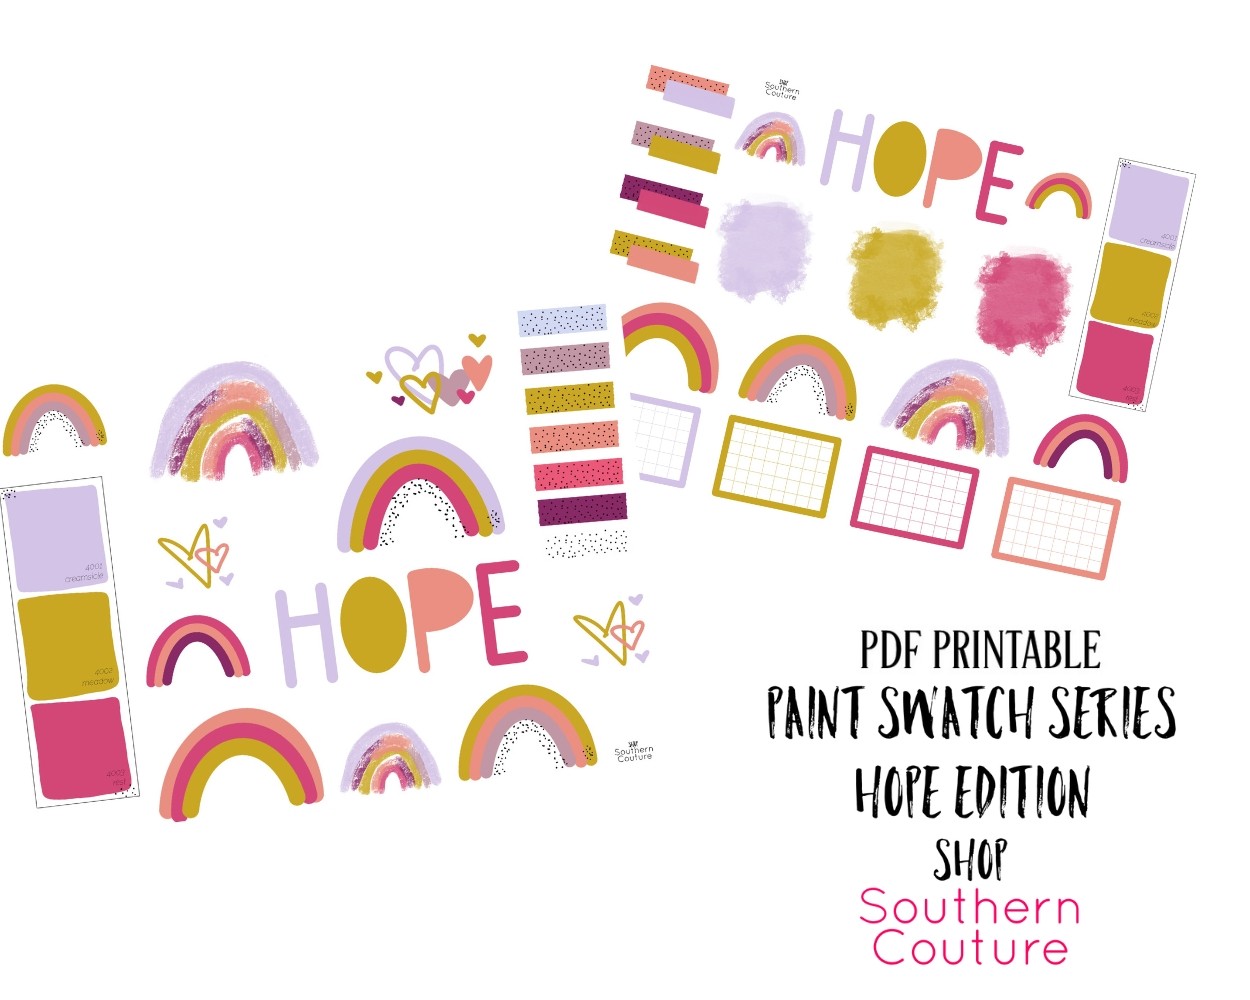 https://www.thesoutherncouture.com/wp-content/uploads/2020/07/Paint-Swatch-Series_-Hope-Edition-1.jpg